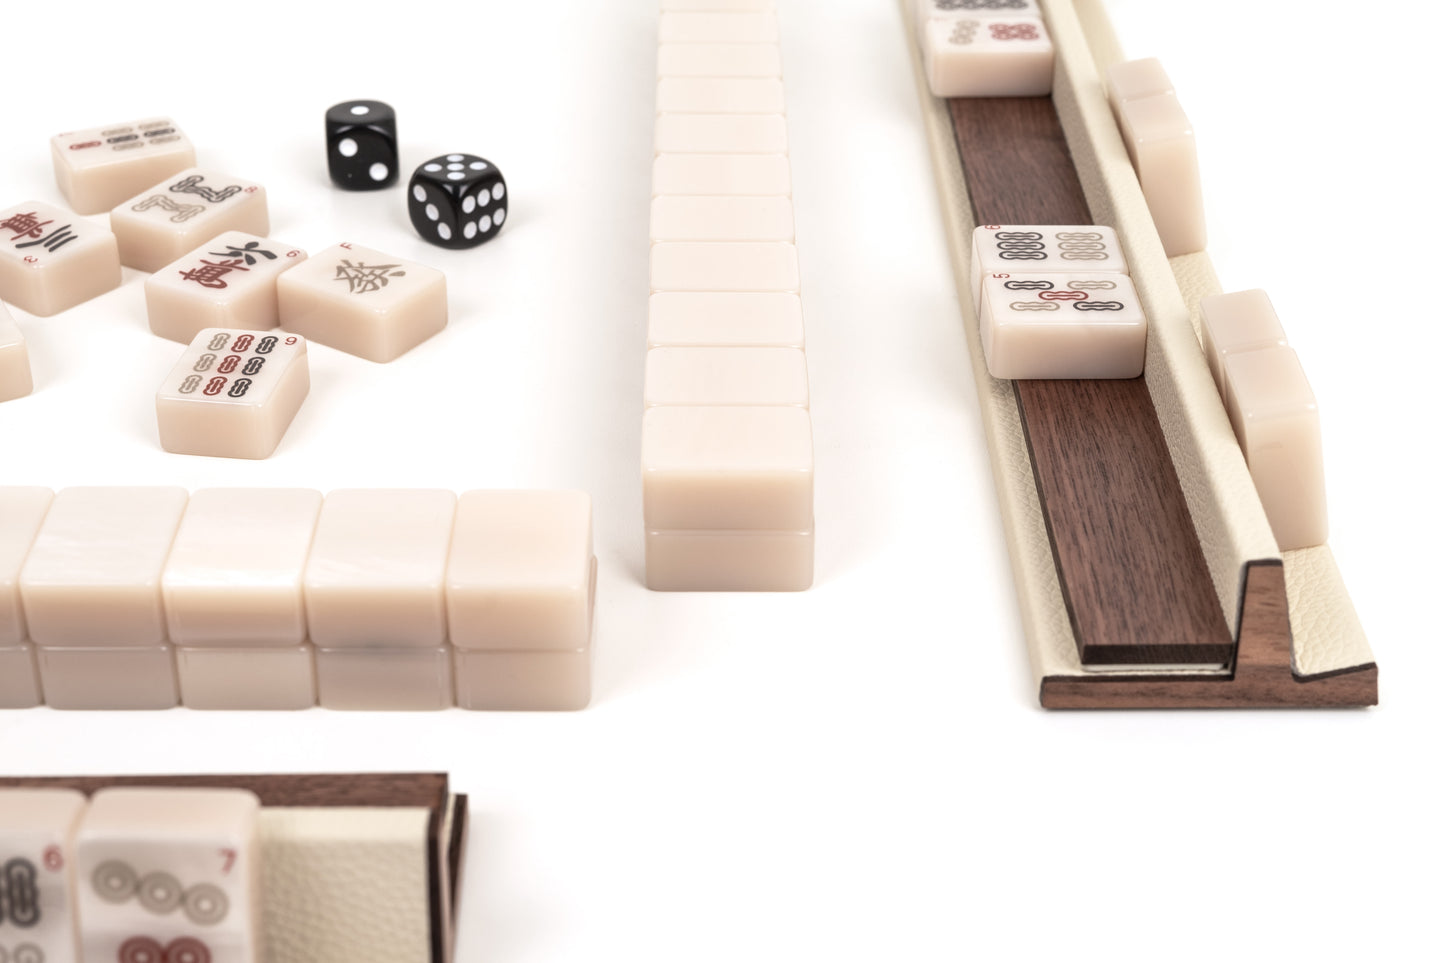 Pinetti Leather-covered Mahjong Game Set | Exquisite Craftsmanship | Premium Leather Cover | Classic Mahjong Tiles | Ideal for Leisure and Entertainment | Explore a Range of Luxury Home Accessories at 2Jour Concierge, #1 luxury high-end gift & lifestyle shop